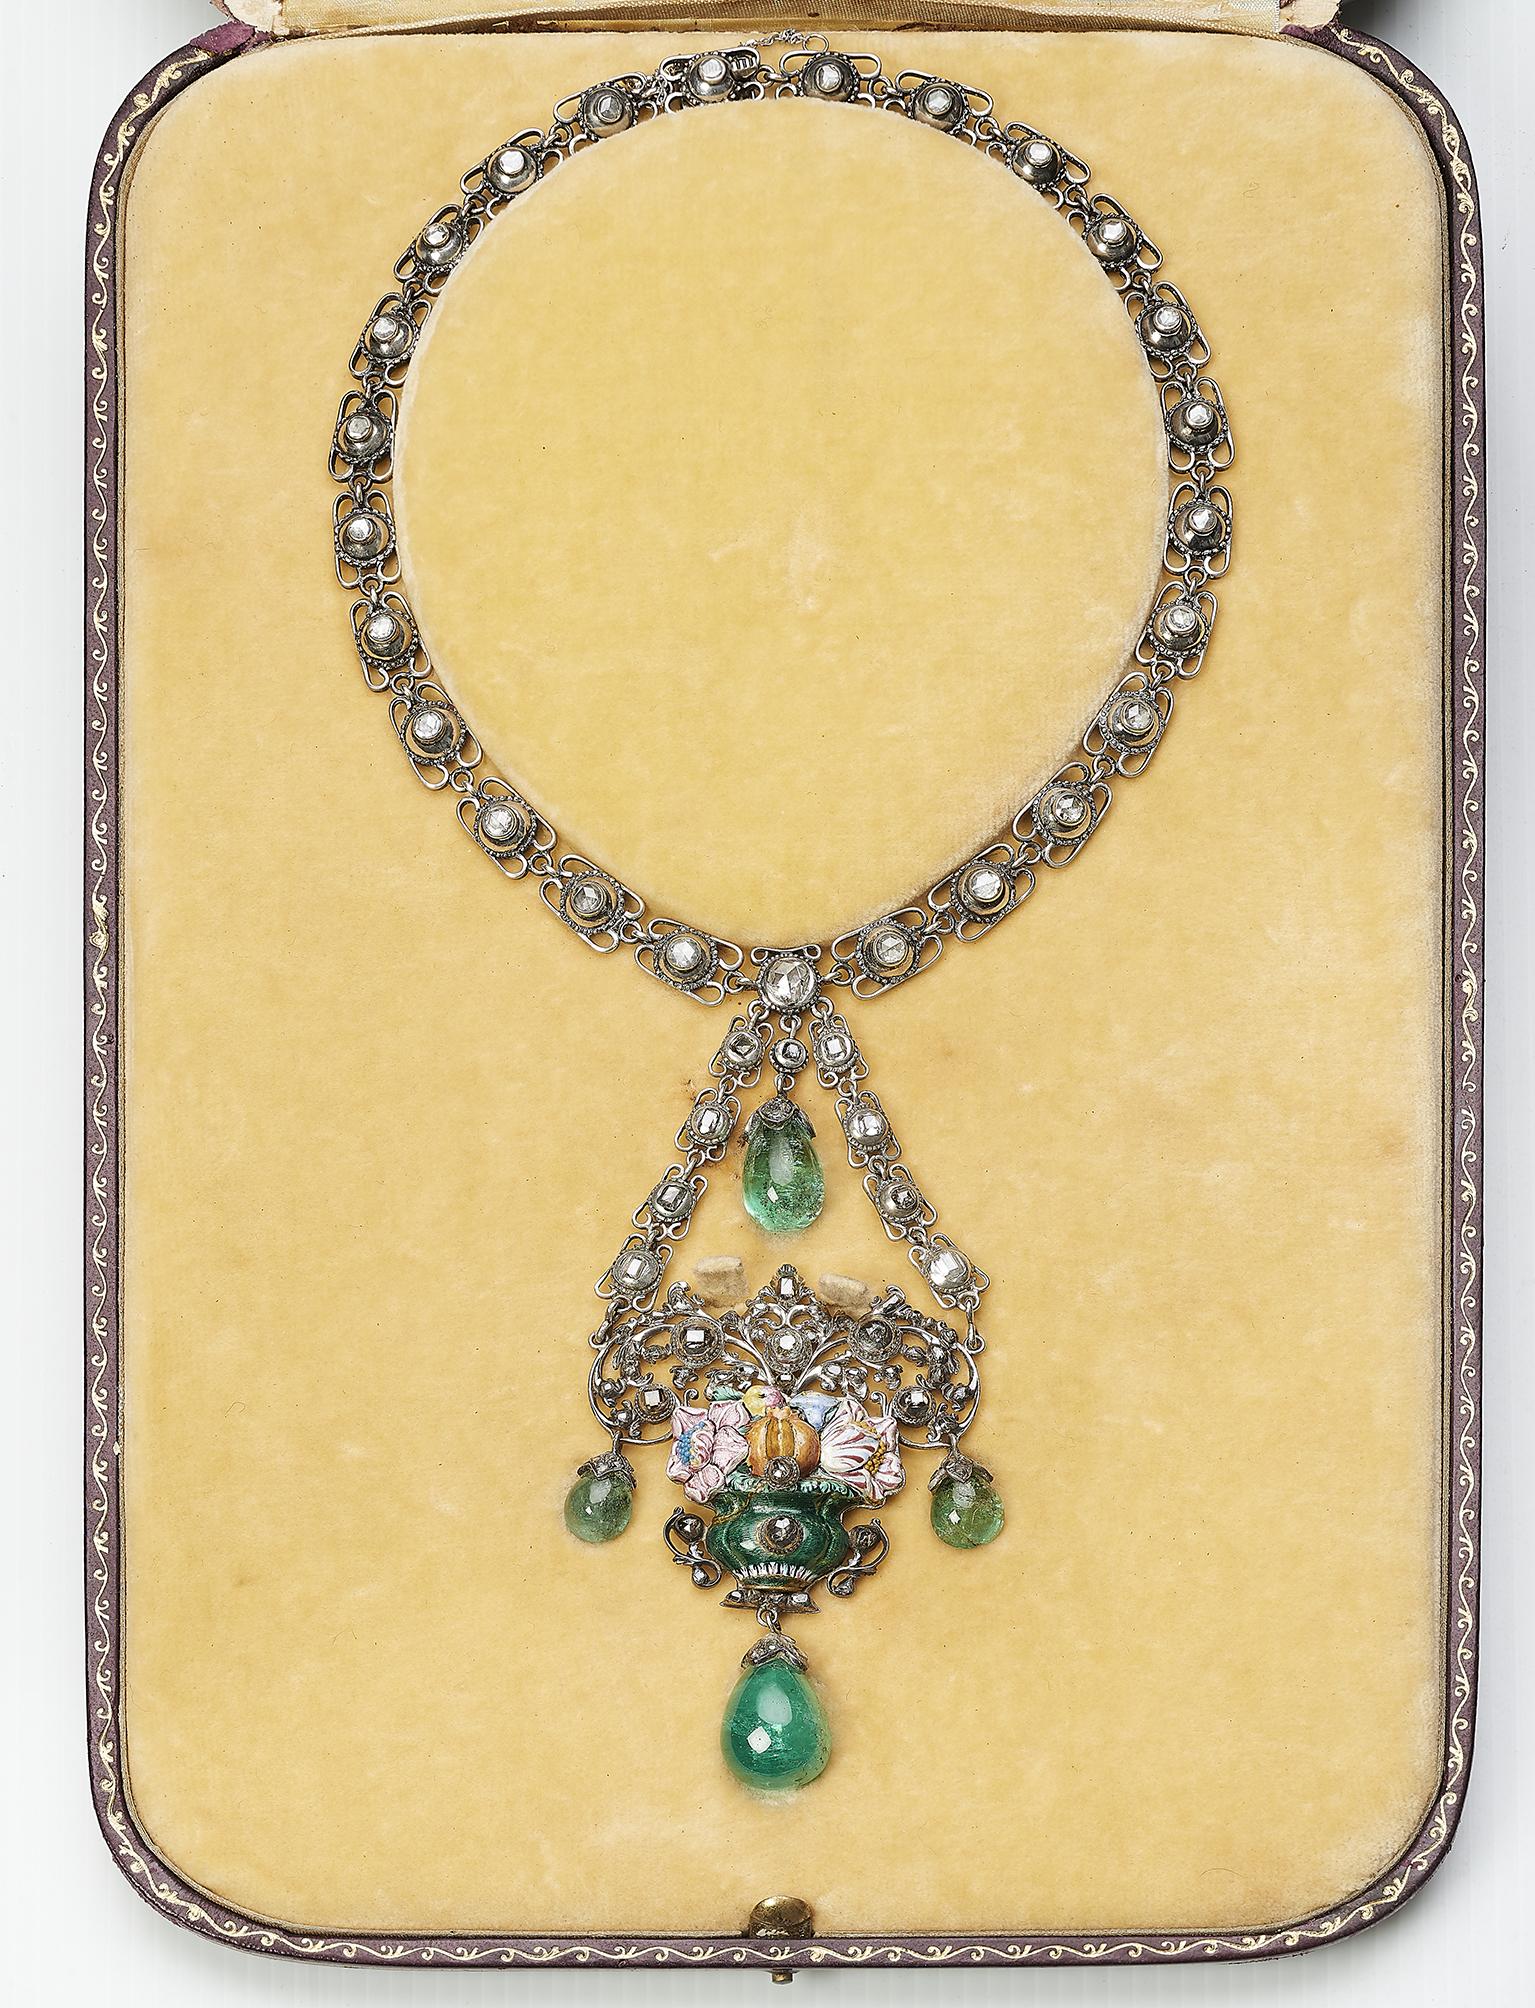 Important 1850s Spanish Romantic  Elizabethan II  140ct Colombian Emeralds Necklace
Mounted in silver the precious material of those times and old cut diamonds
Original Jewelry cases, drawings and sketches with measures
Provenance from an